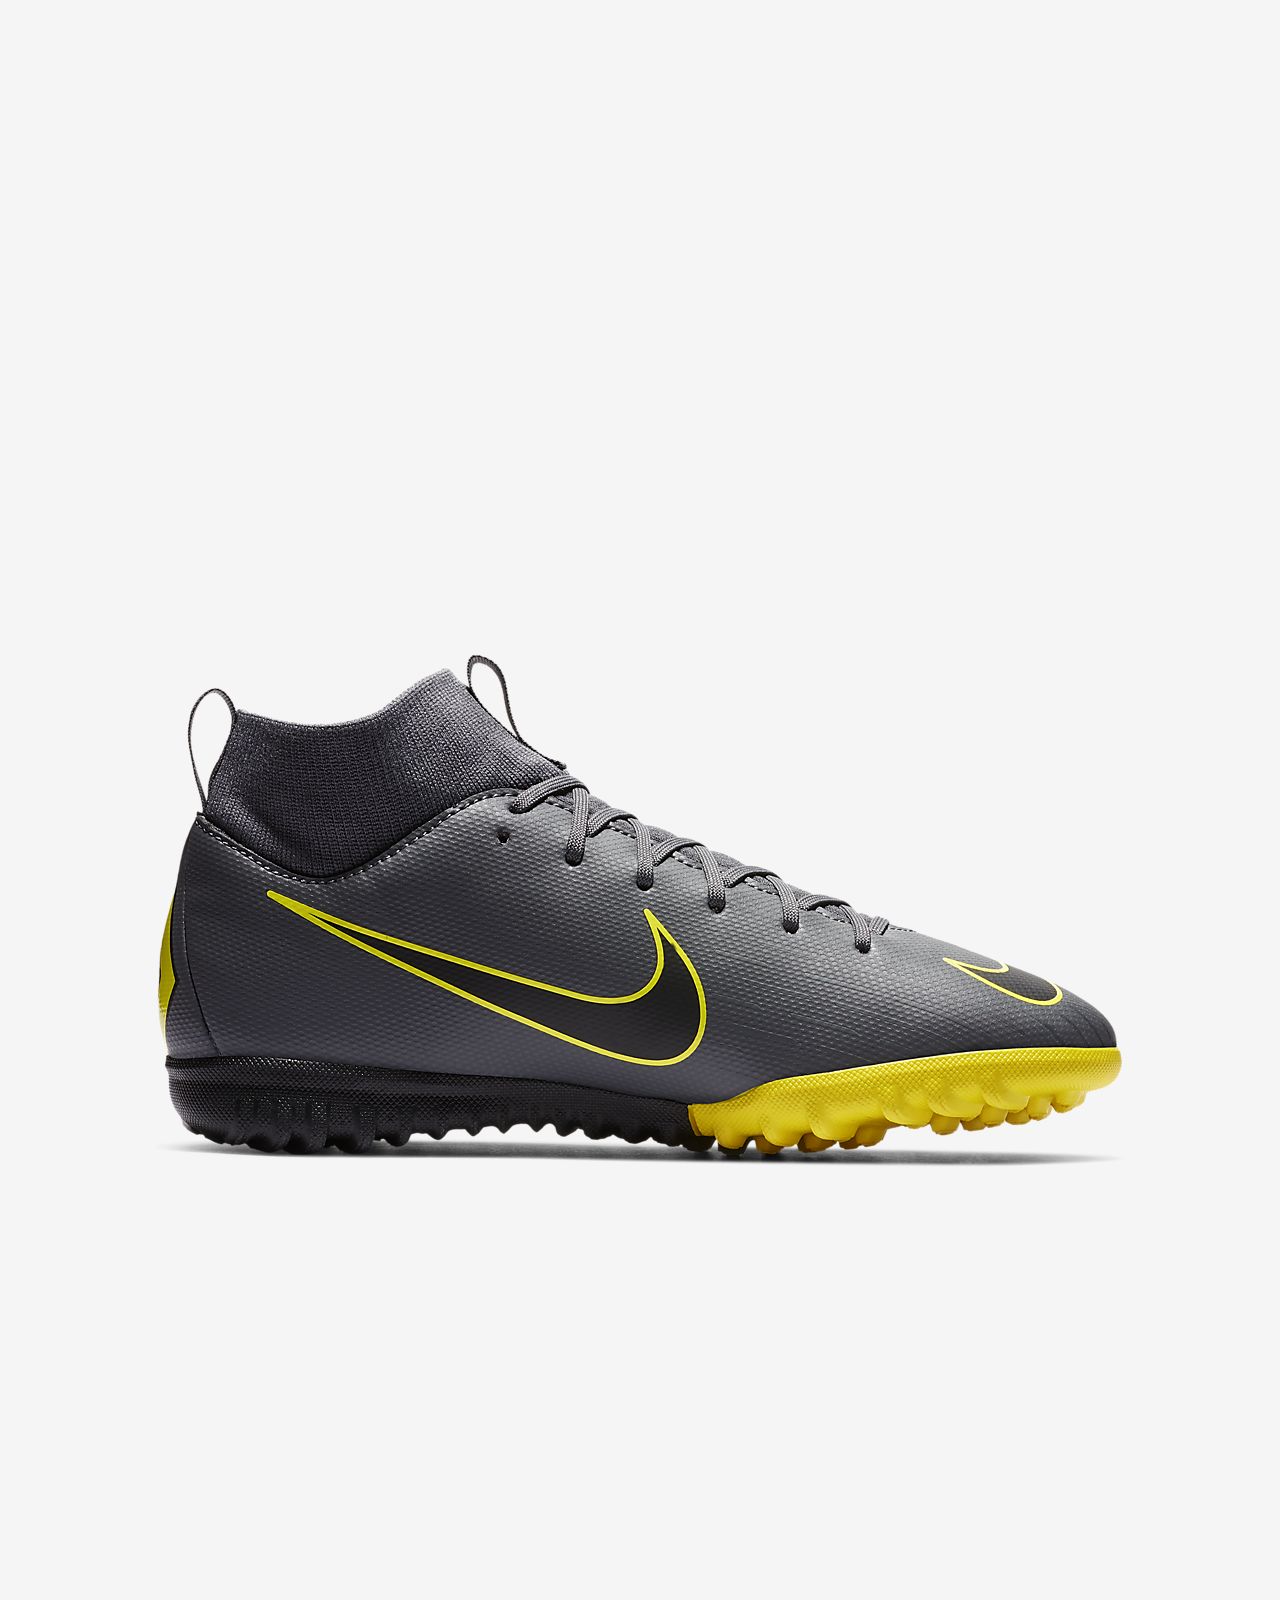 Soccer shoes Nike Mercurial Superfly VI Elite FG Stealth OPS.